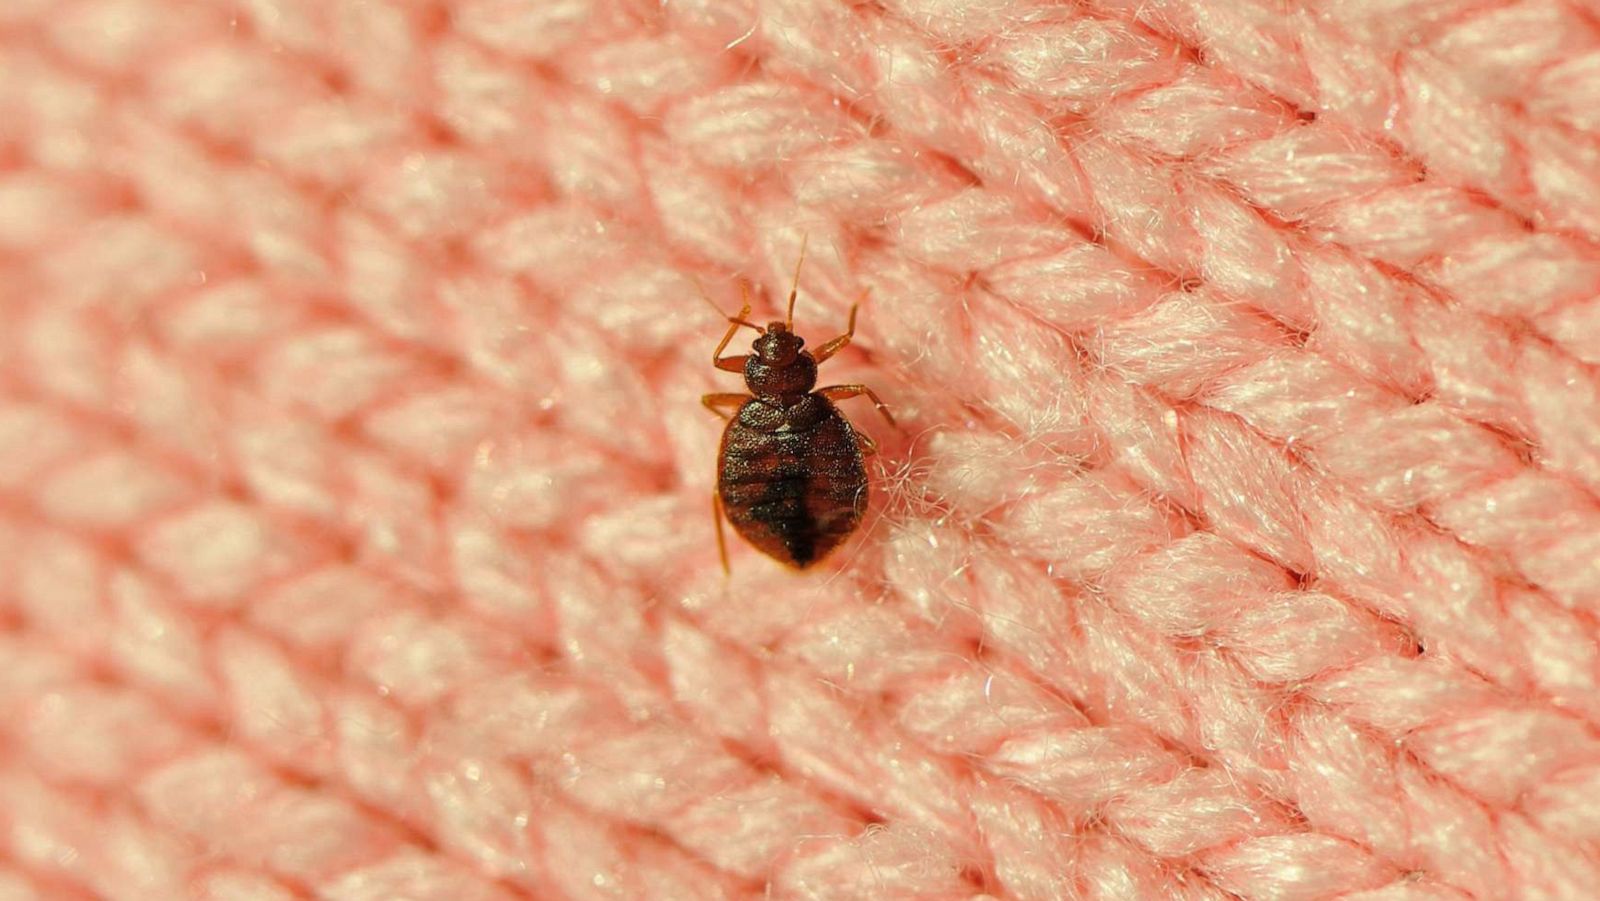 Chapter 4: Prevention & Treatment of Bed Bugs